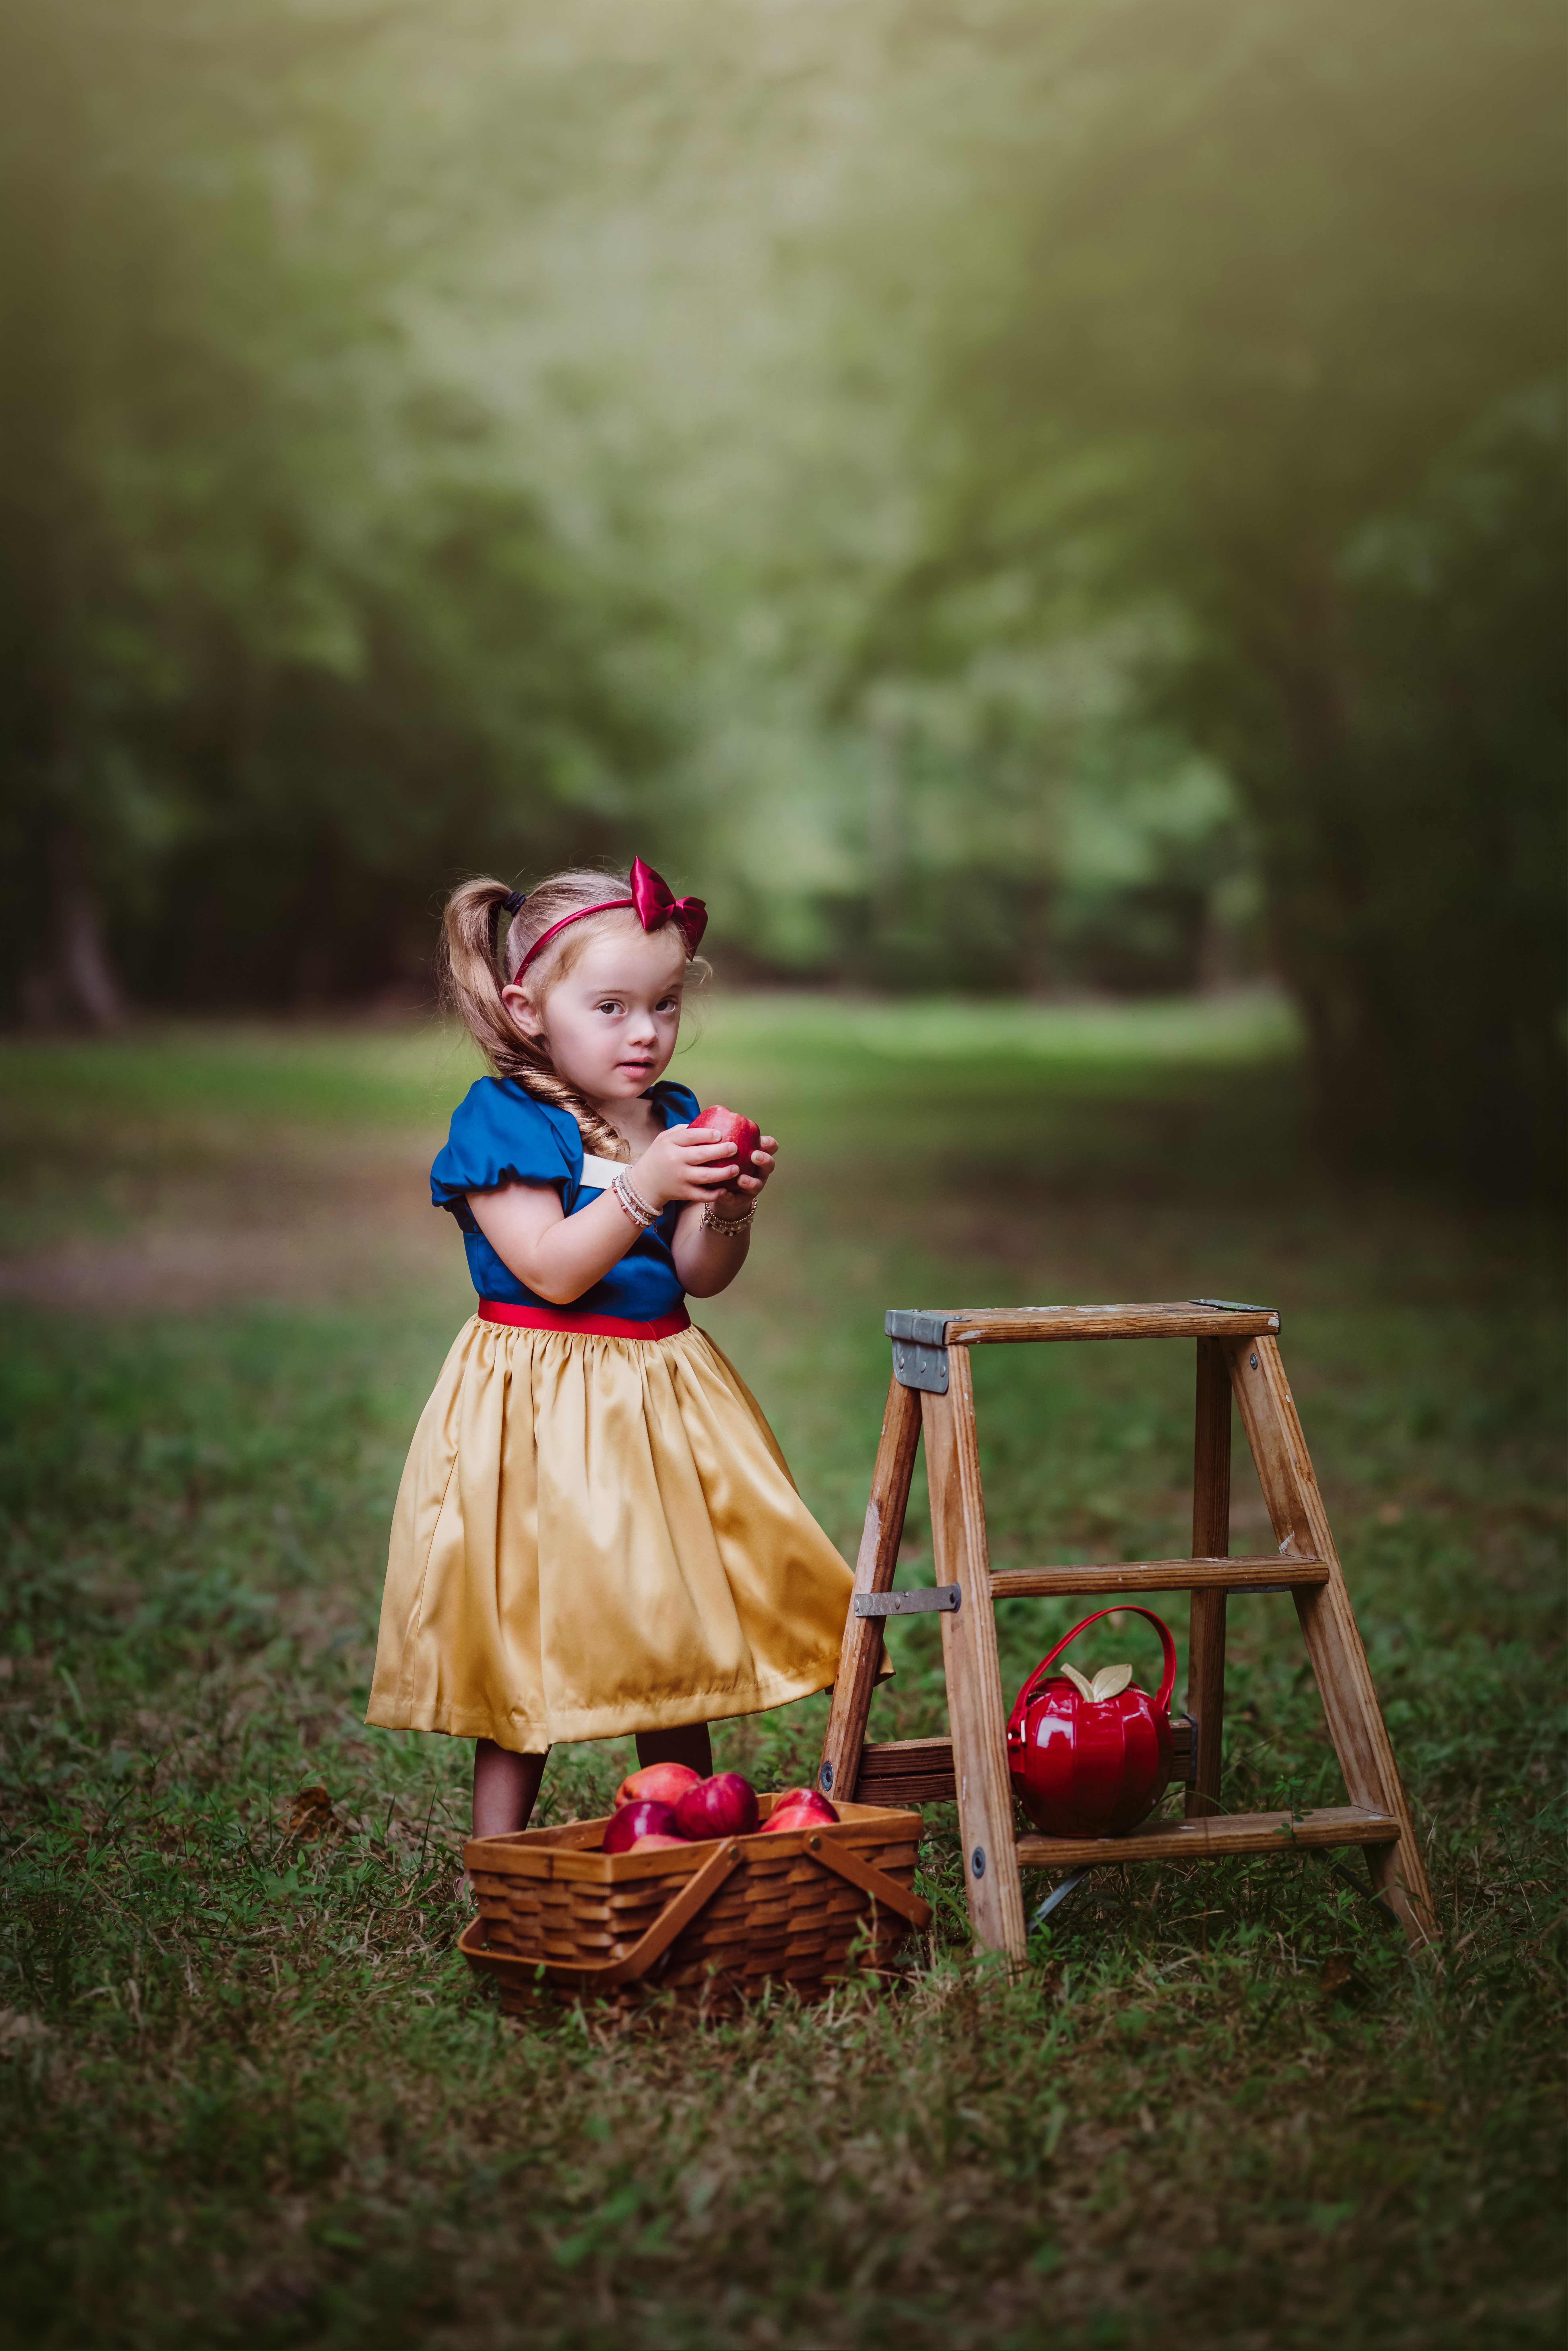 a little girl with down syndrome plays dress up as snow white with apples